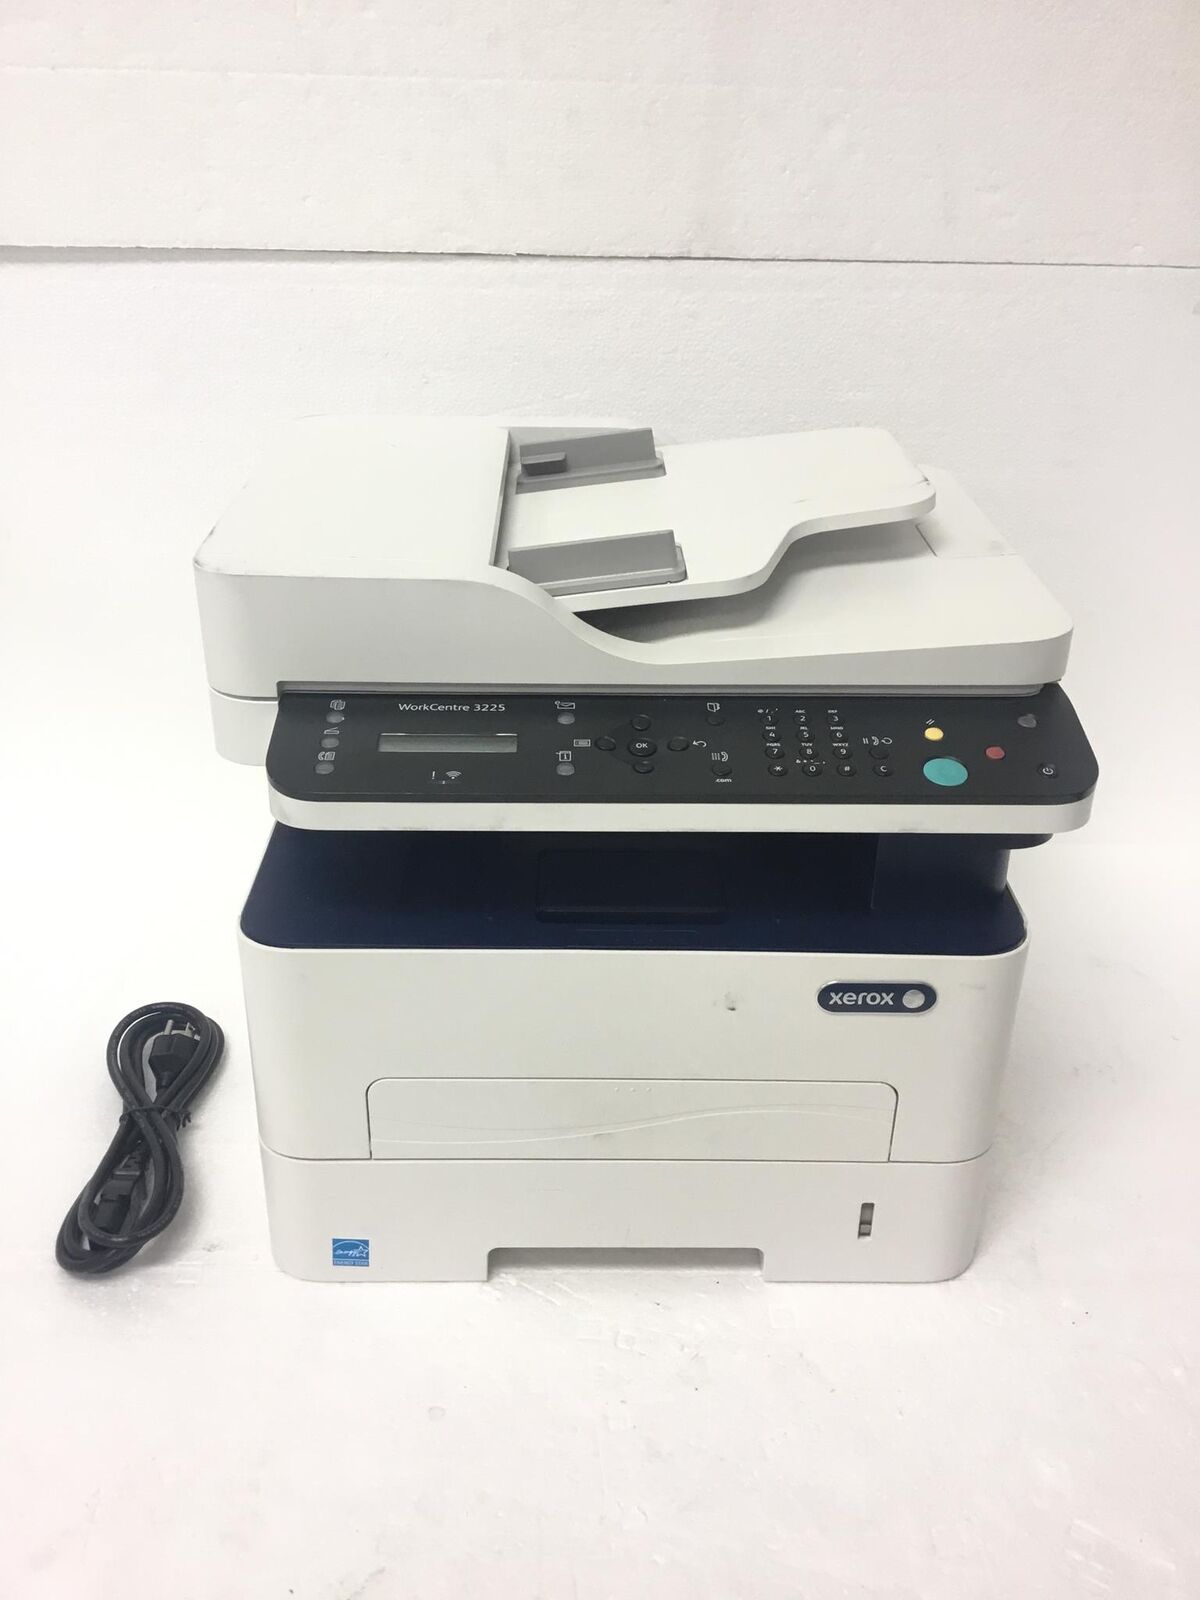 XEROX WORKCENTRE 3225 Multifunction Laser Printer w/Toner,44K Pages Printed